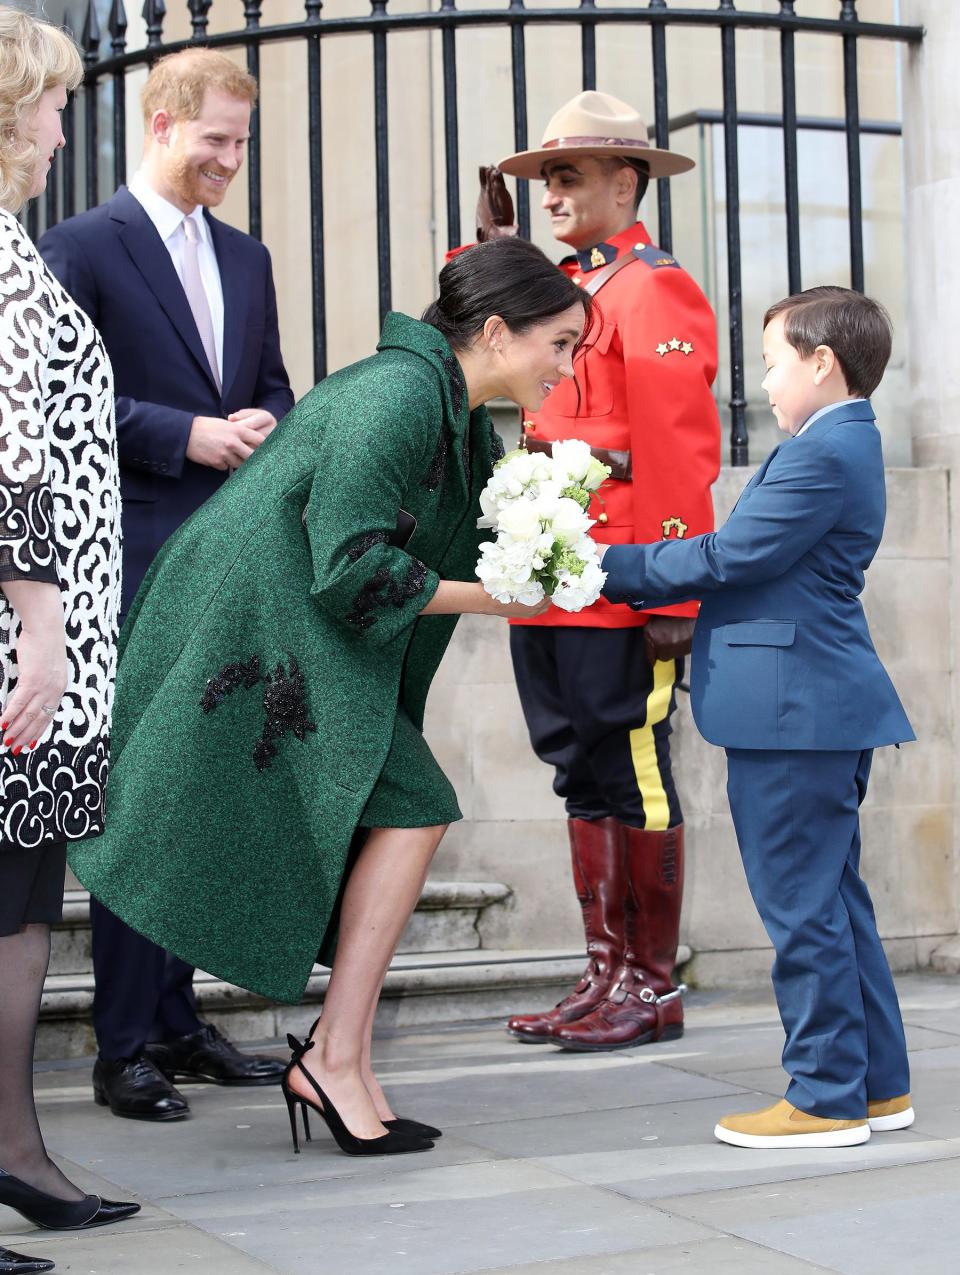 Back in March, Meghan, 37, accepted flowers from an adorable young wellwisher at Canada House as Prince Harry, 34, looked on, beaming.